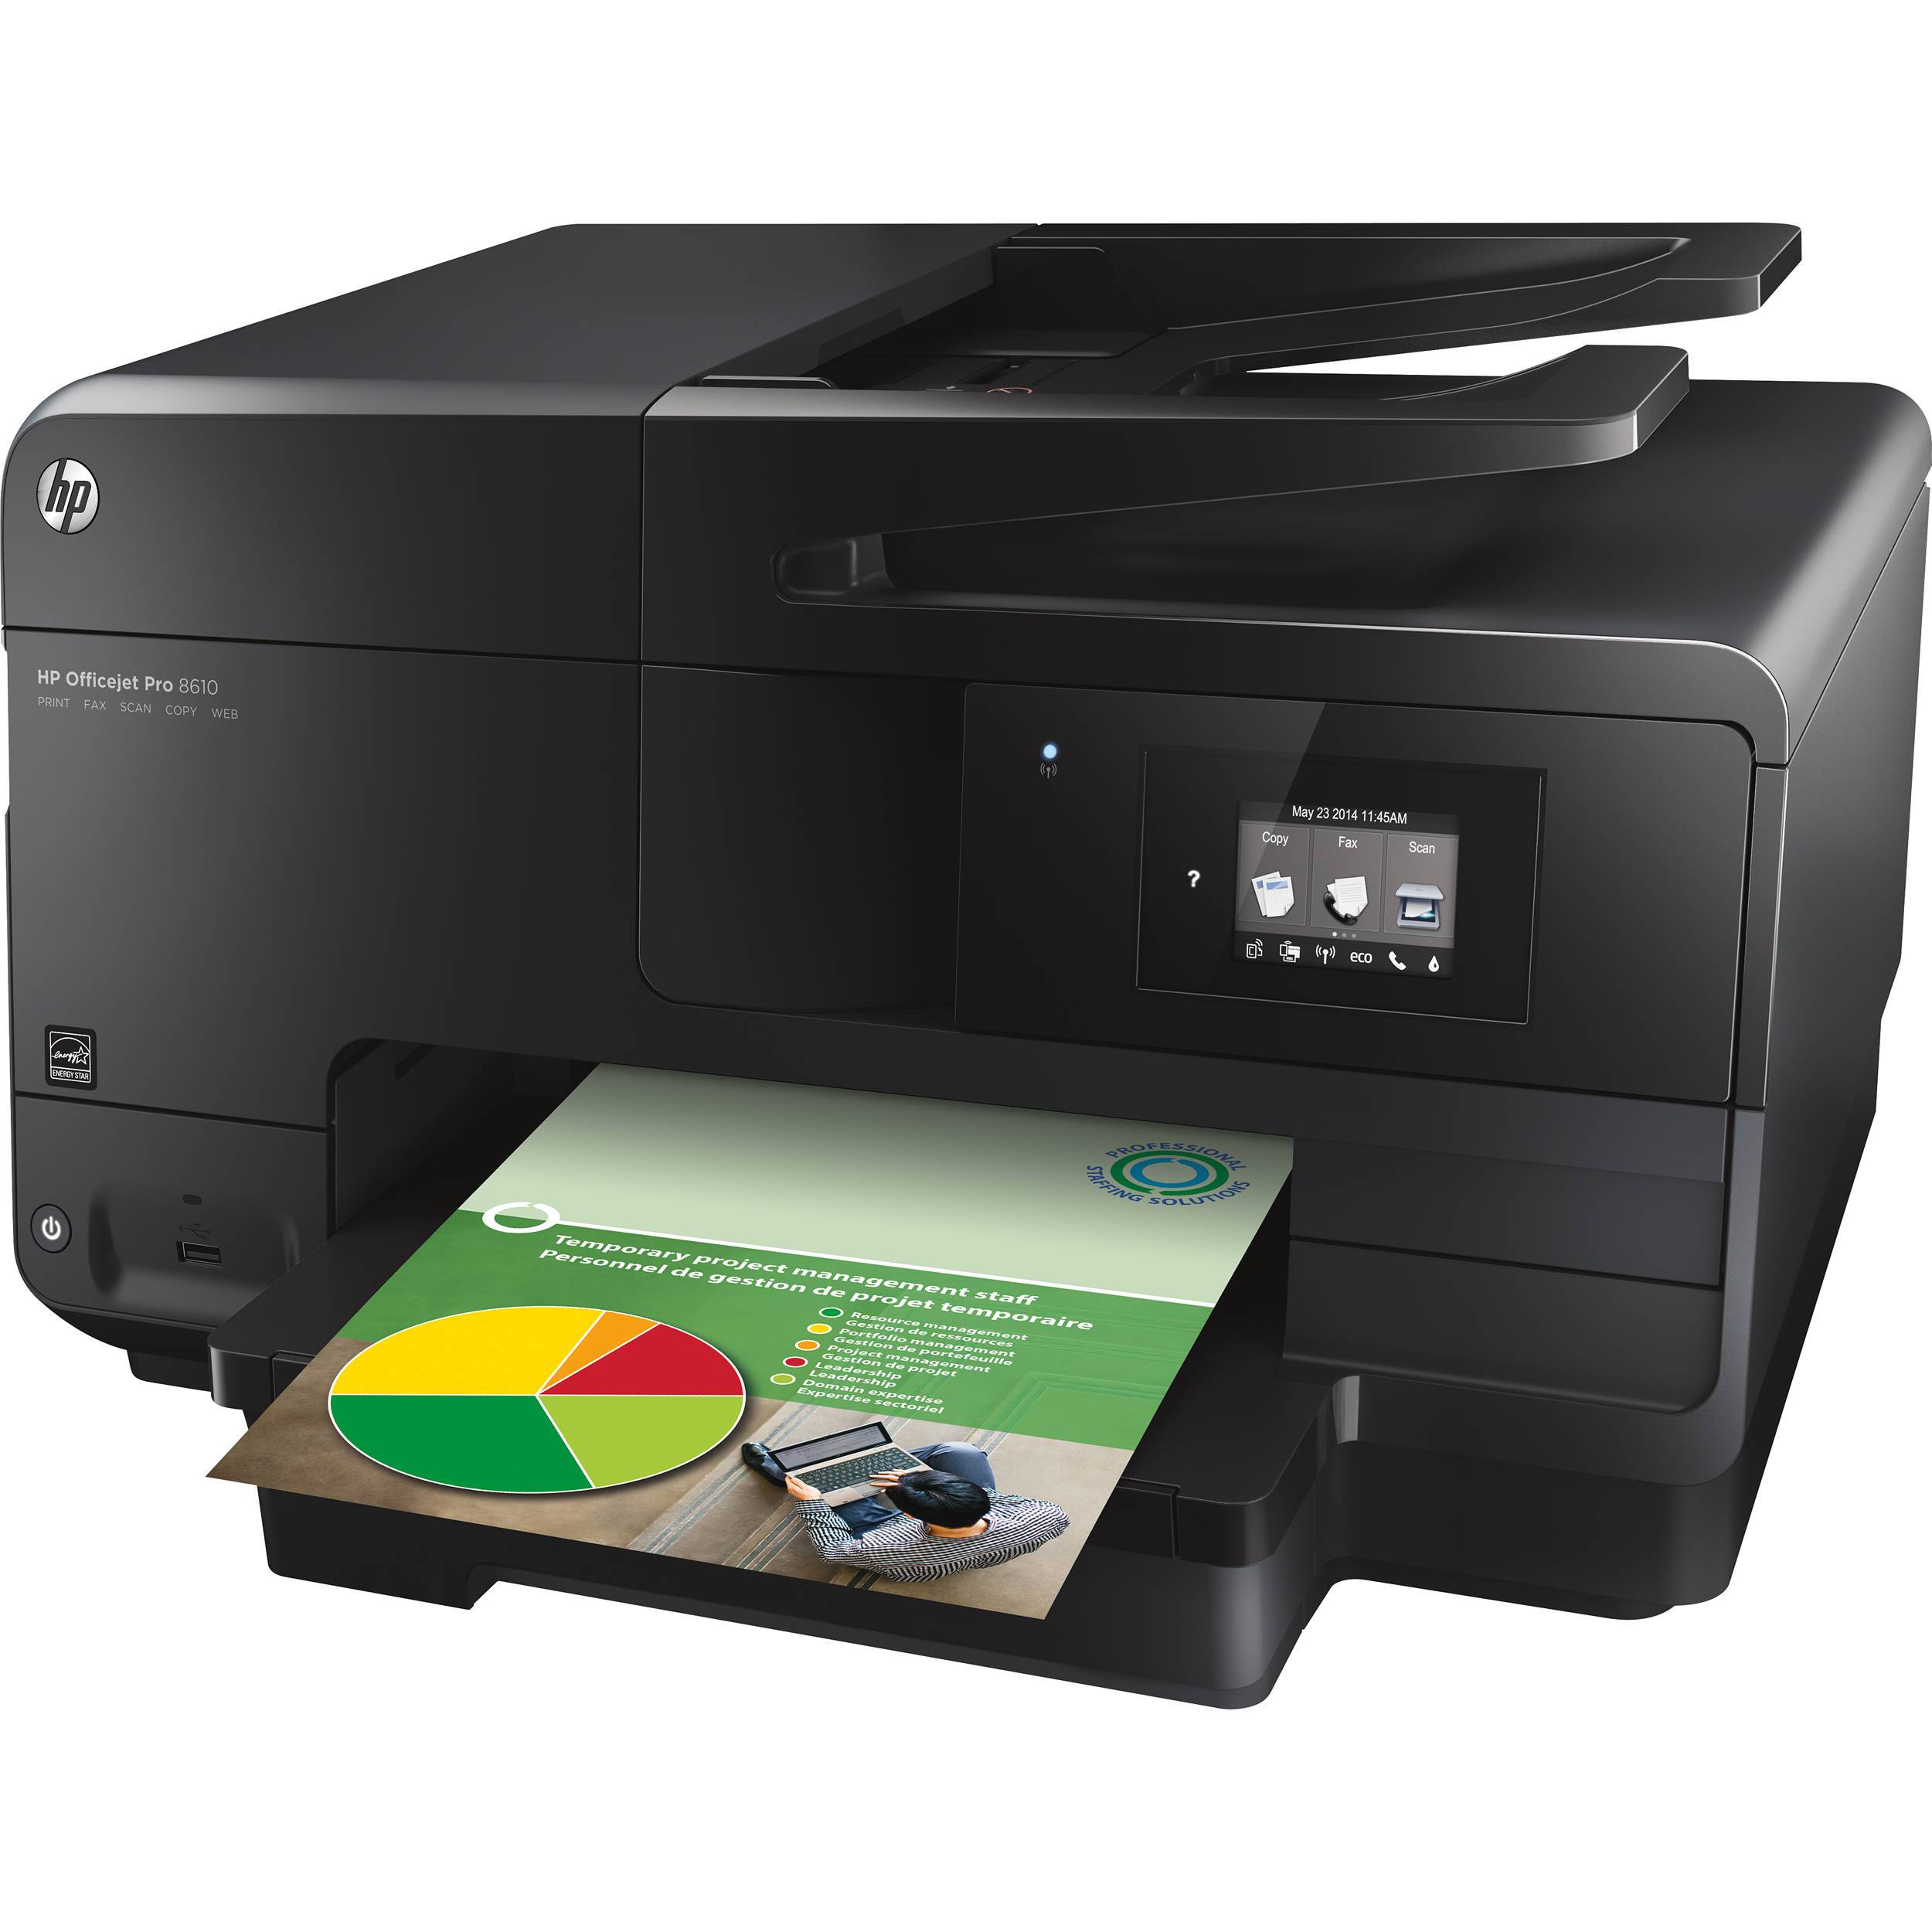 Hp officejet 4500 driver download